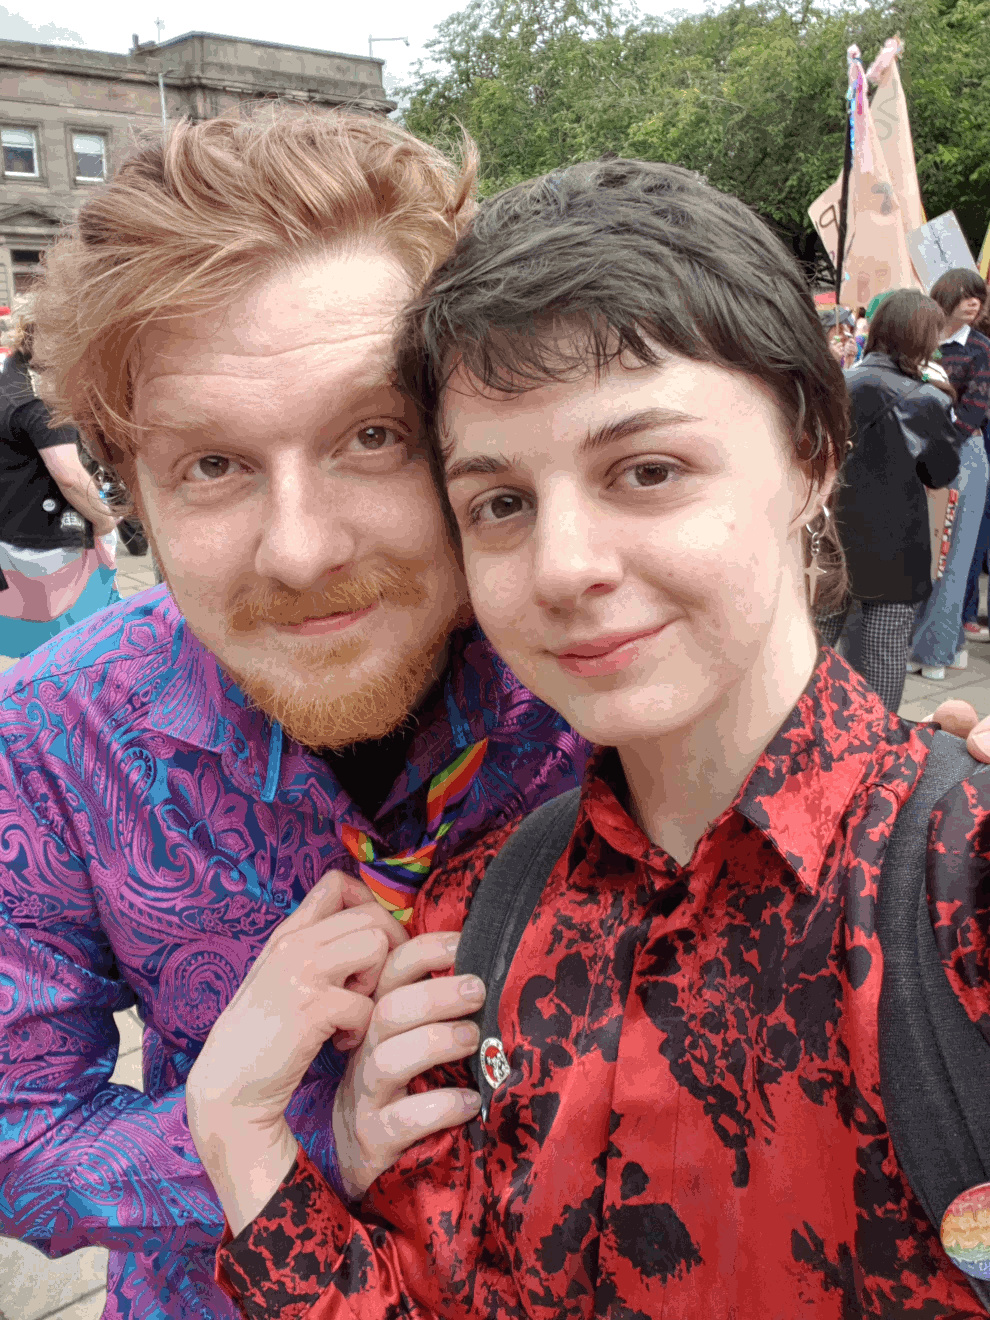 2 people; myself and my boyfriend, standing in front of a large group of LGBTQ+ people